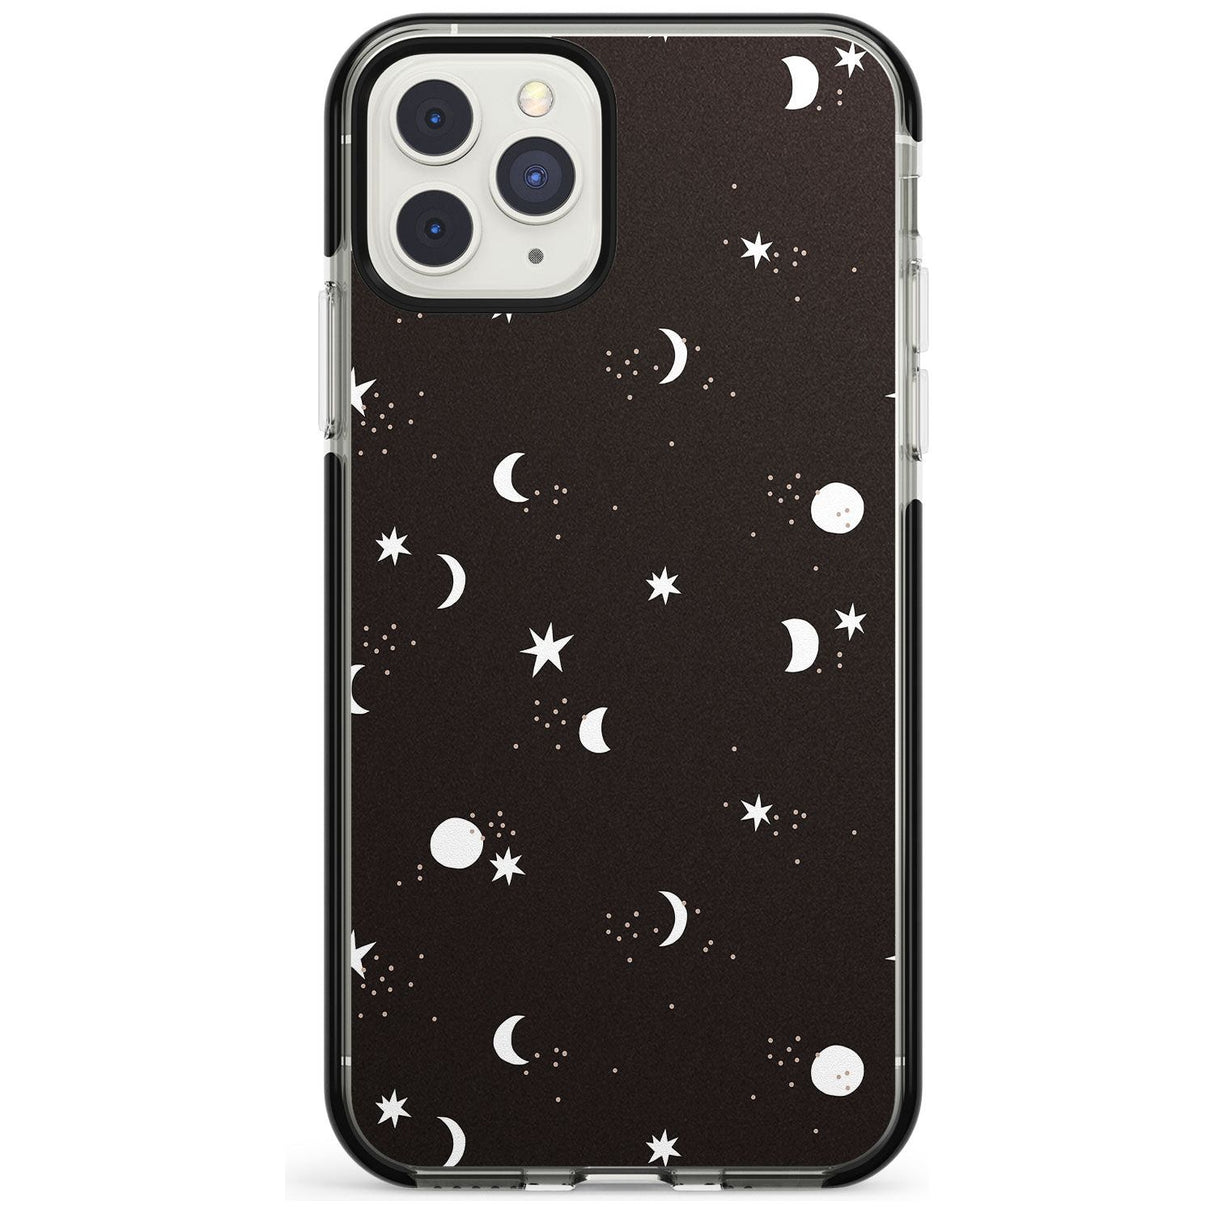 Funky Moons & Stars Phone Case iPhone 11 Pro Max / Black Impact Case,iPhone 11 Pro / Black Impact Case,iPhone 12 Pro Max / Black Impact Case Blanc Space